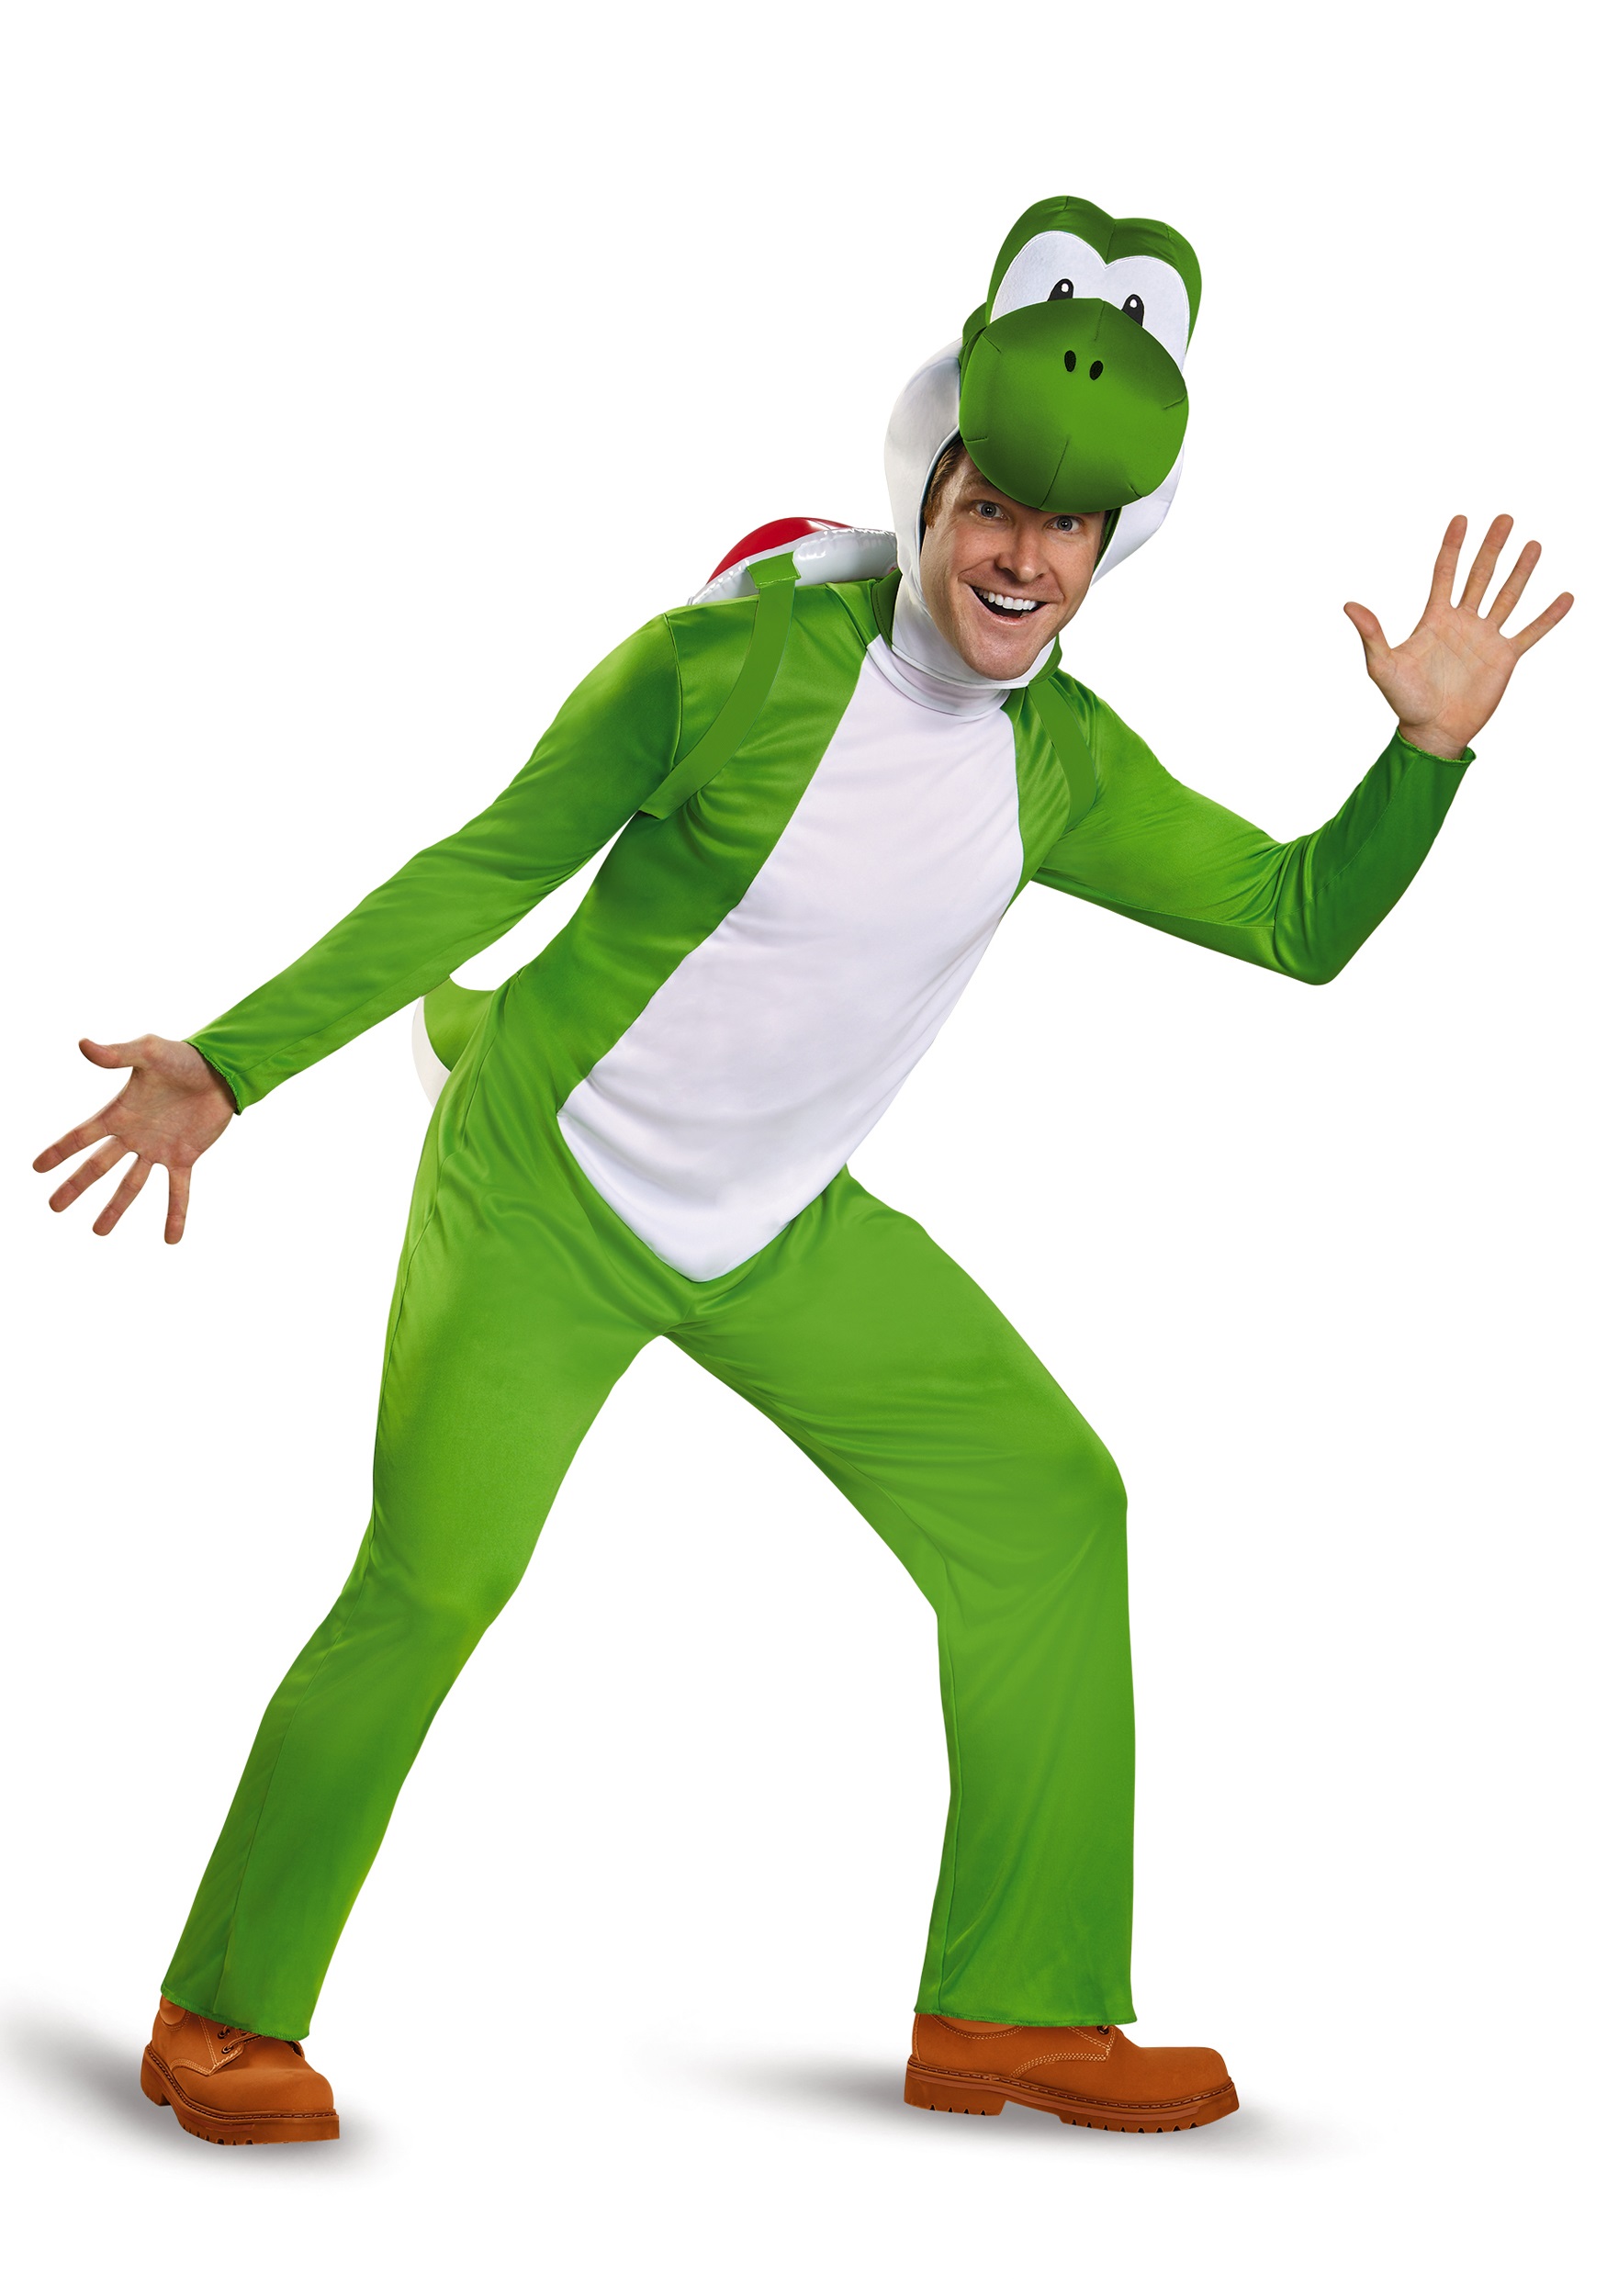 Photos - Fancy Dress Deluxe Disguise  Yoshi Costume for Adults Green/White DI85170 